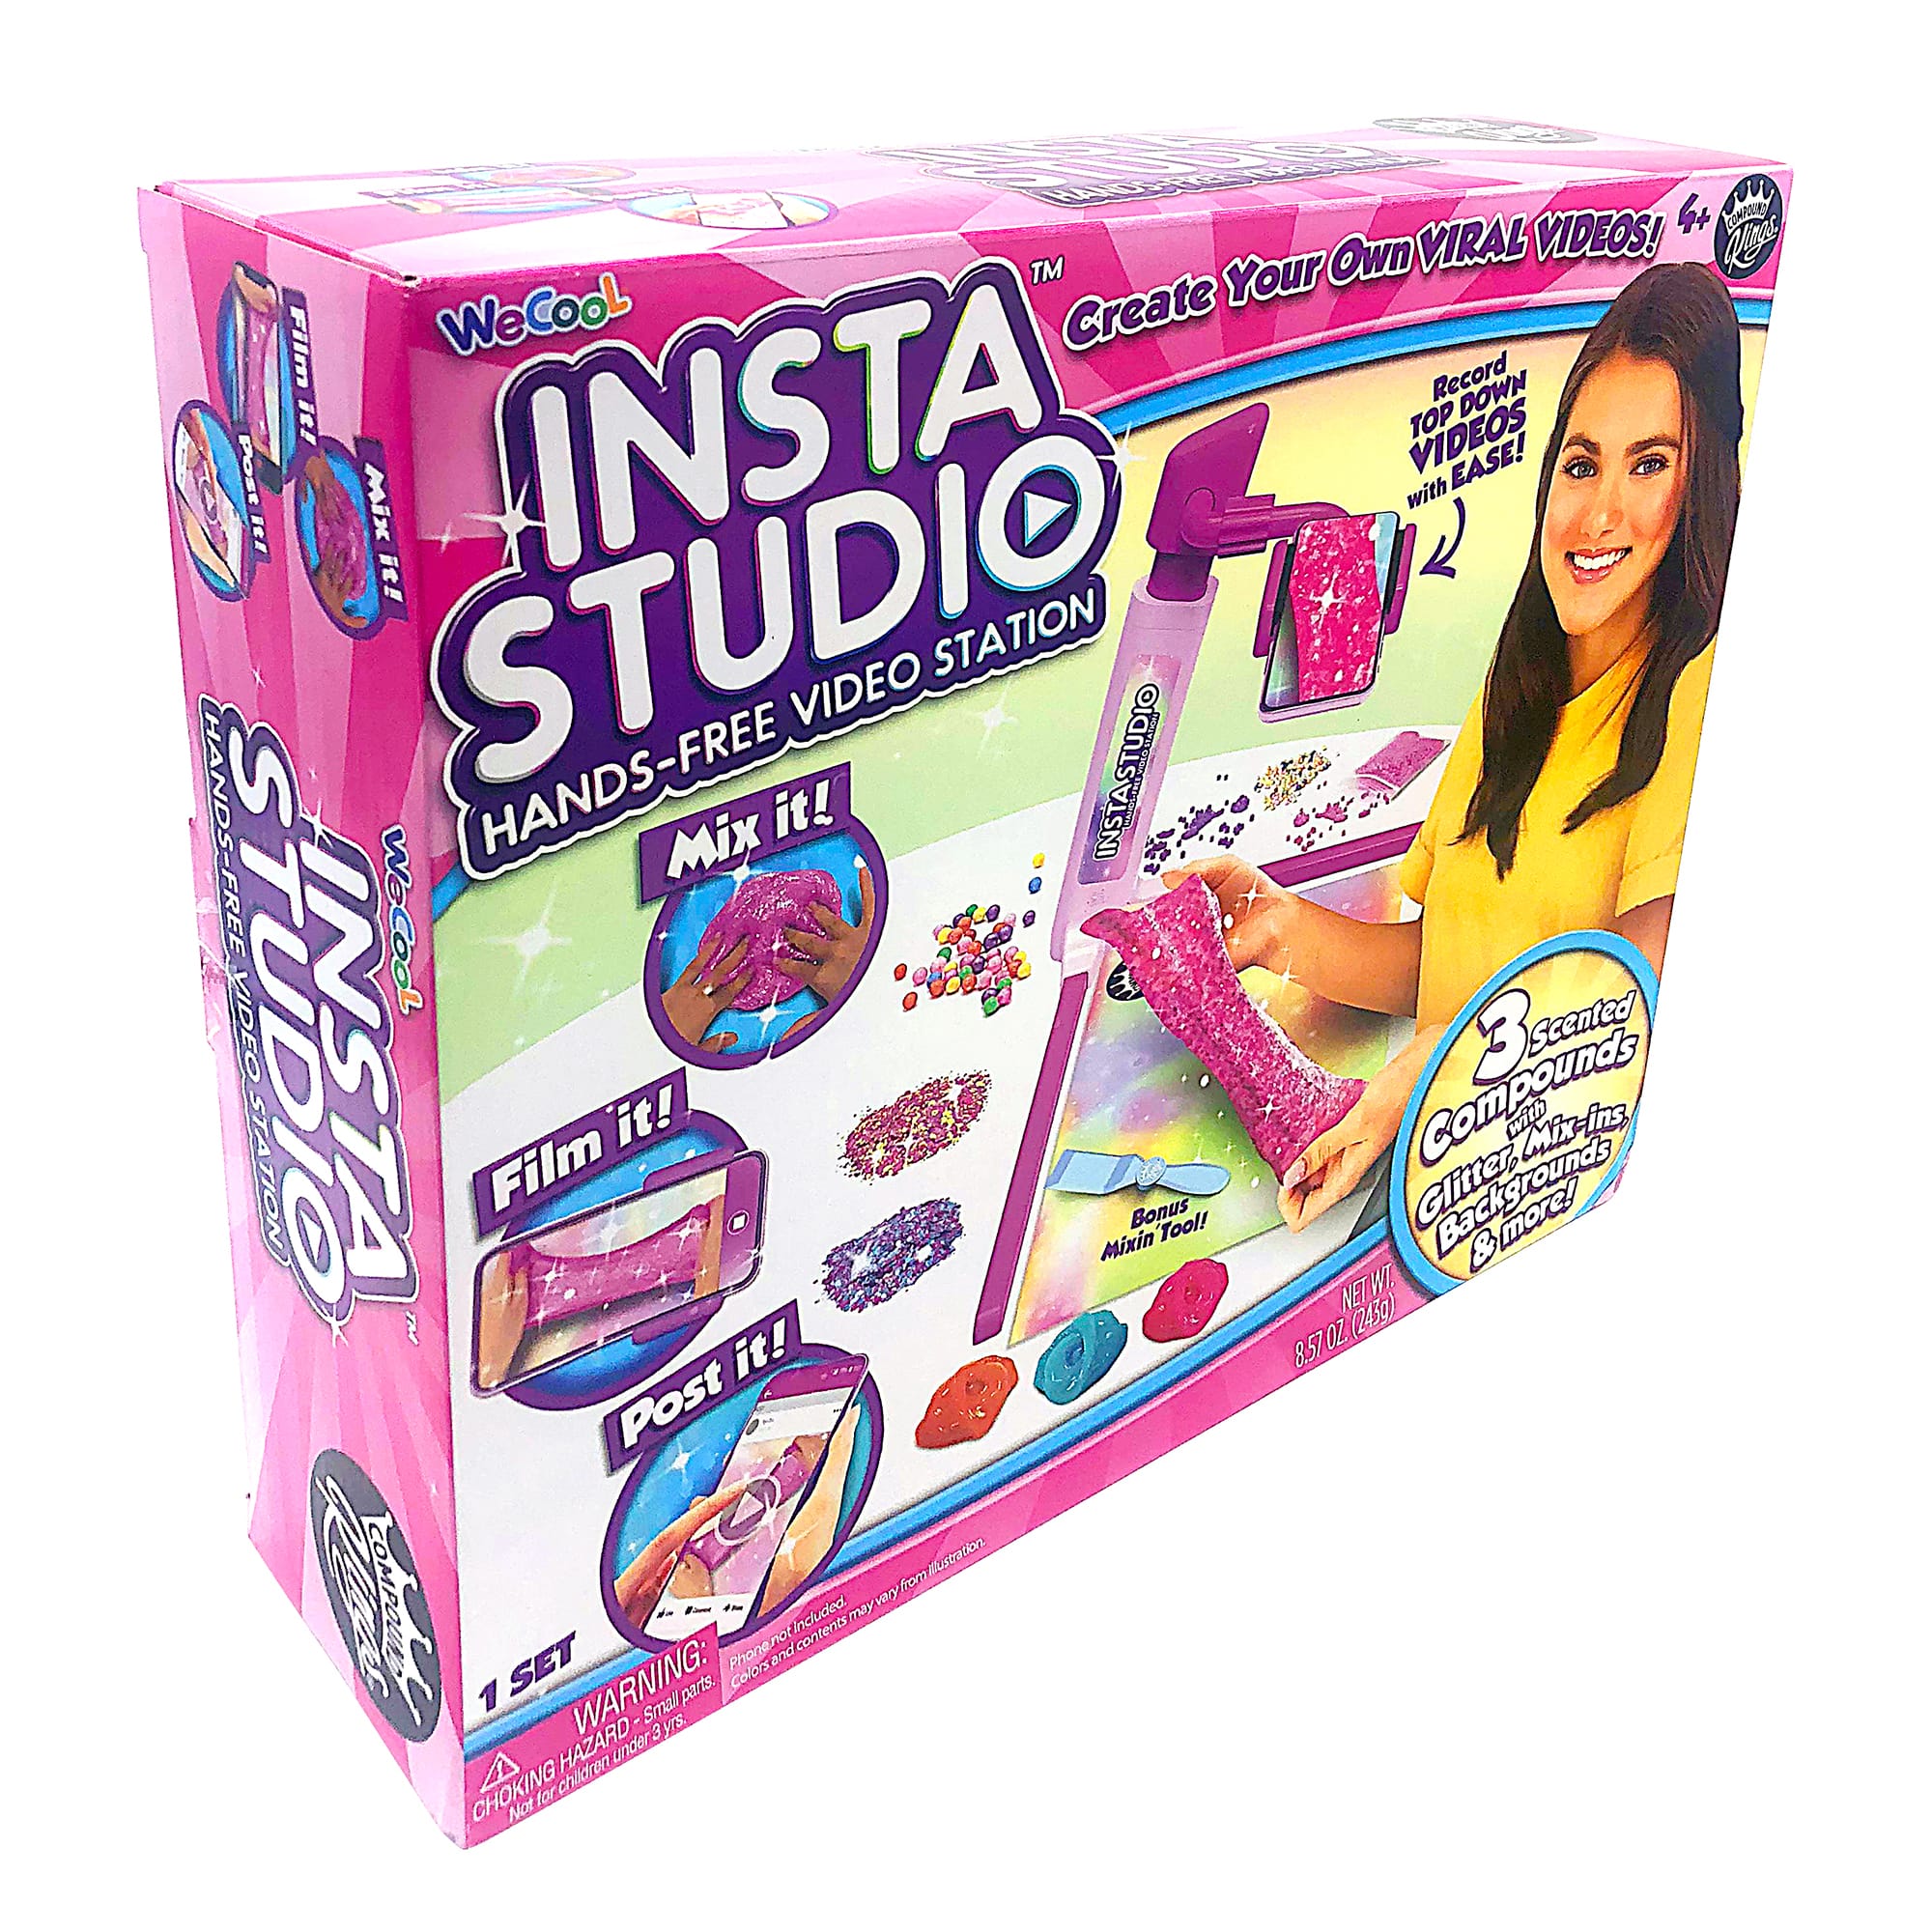 6 Pack: We Cool&#xAE; Insta&#x2122; Studio Hands-Free Video Station